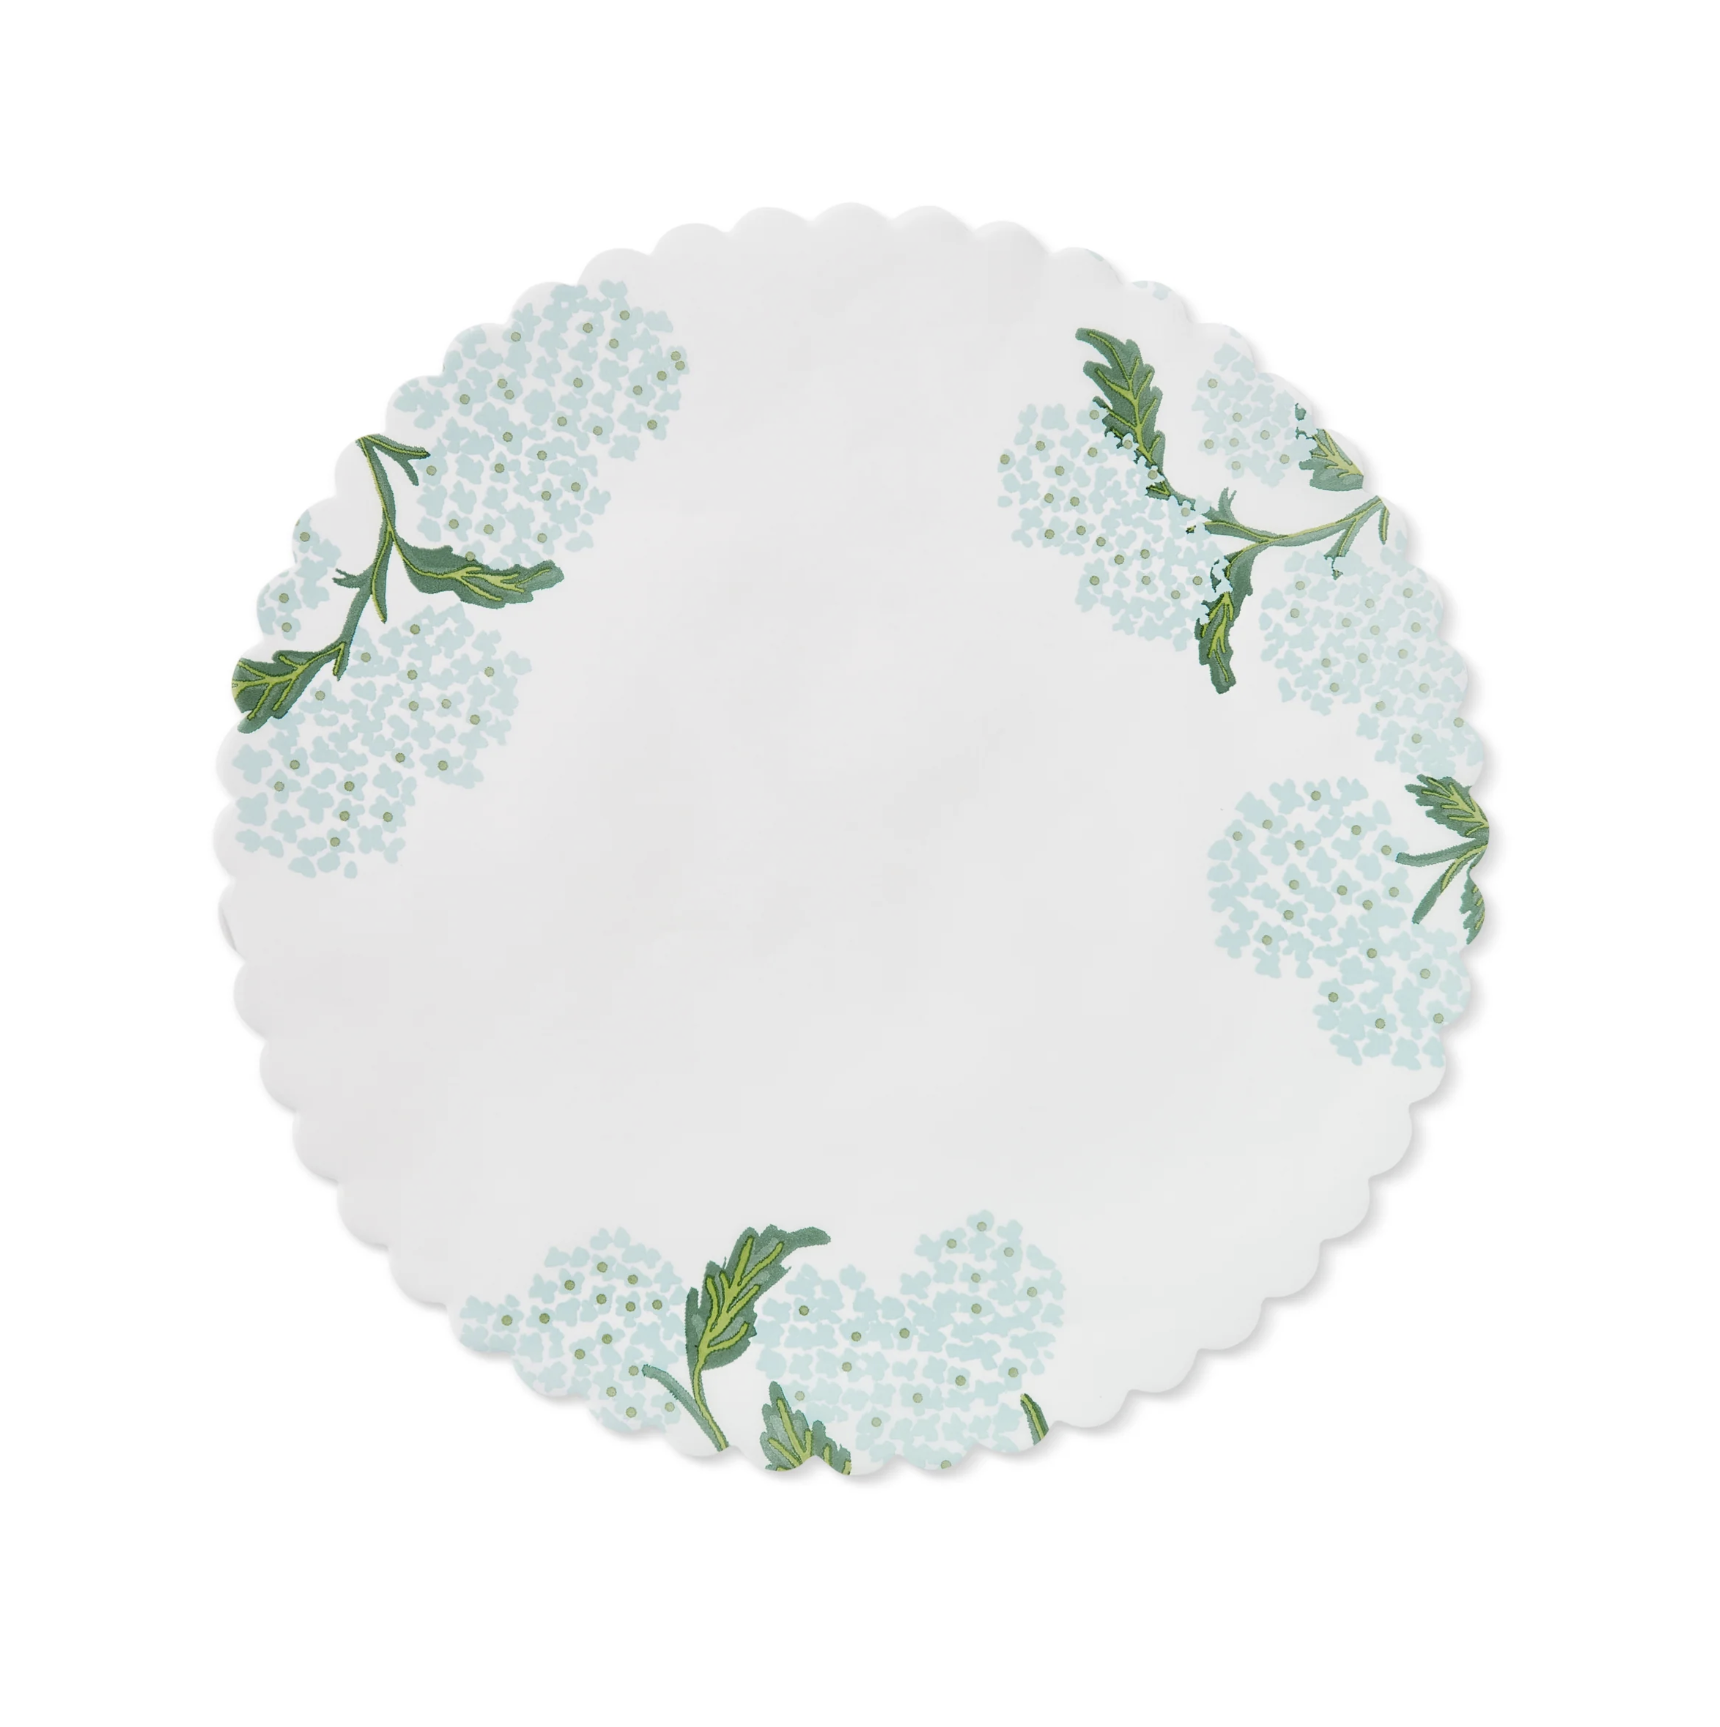 Garden Party flat plate liners